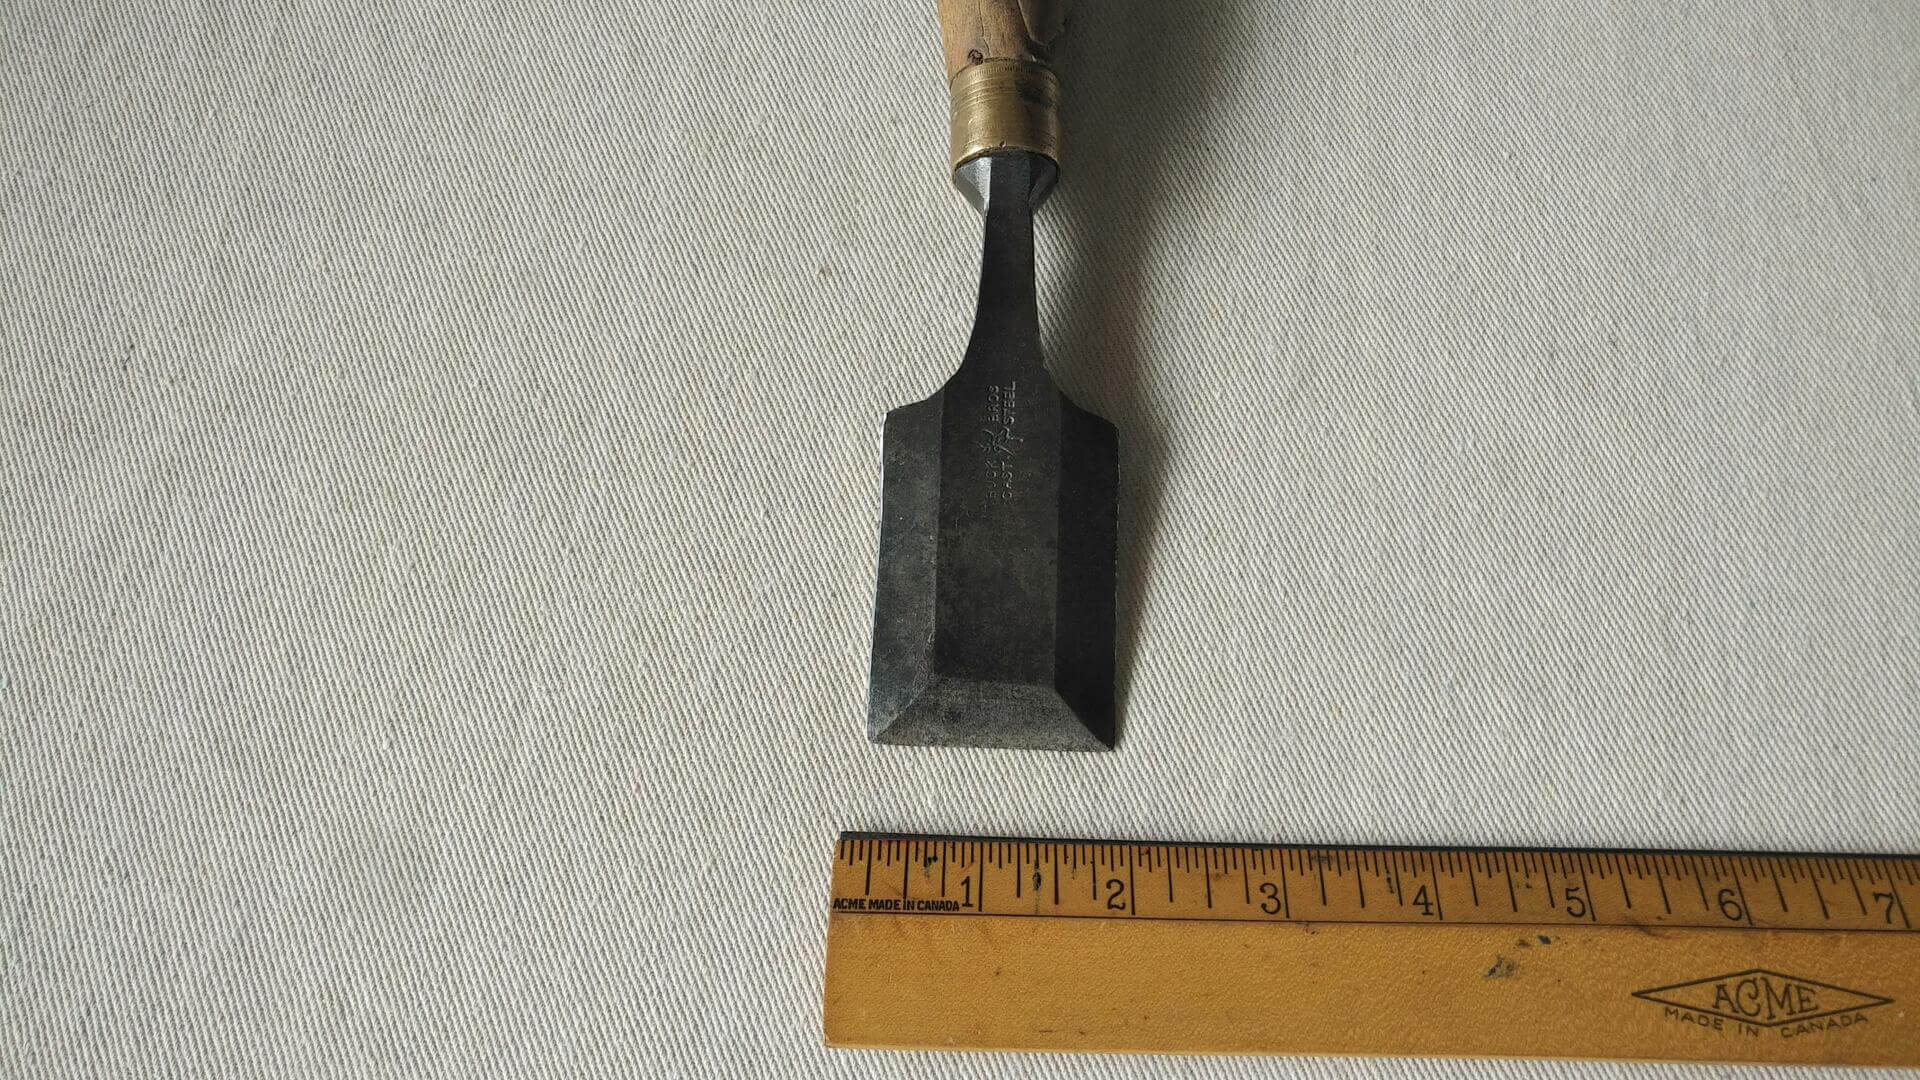 Vintage Buck Bros 1 1/2" beveled edge cast steel tang woodworking chisel brass ferrule Antique made in USA collectible carpentry & cabinet maker edge tools